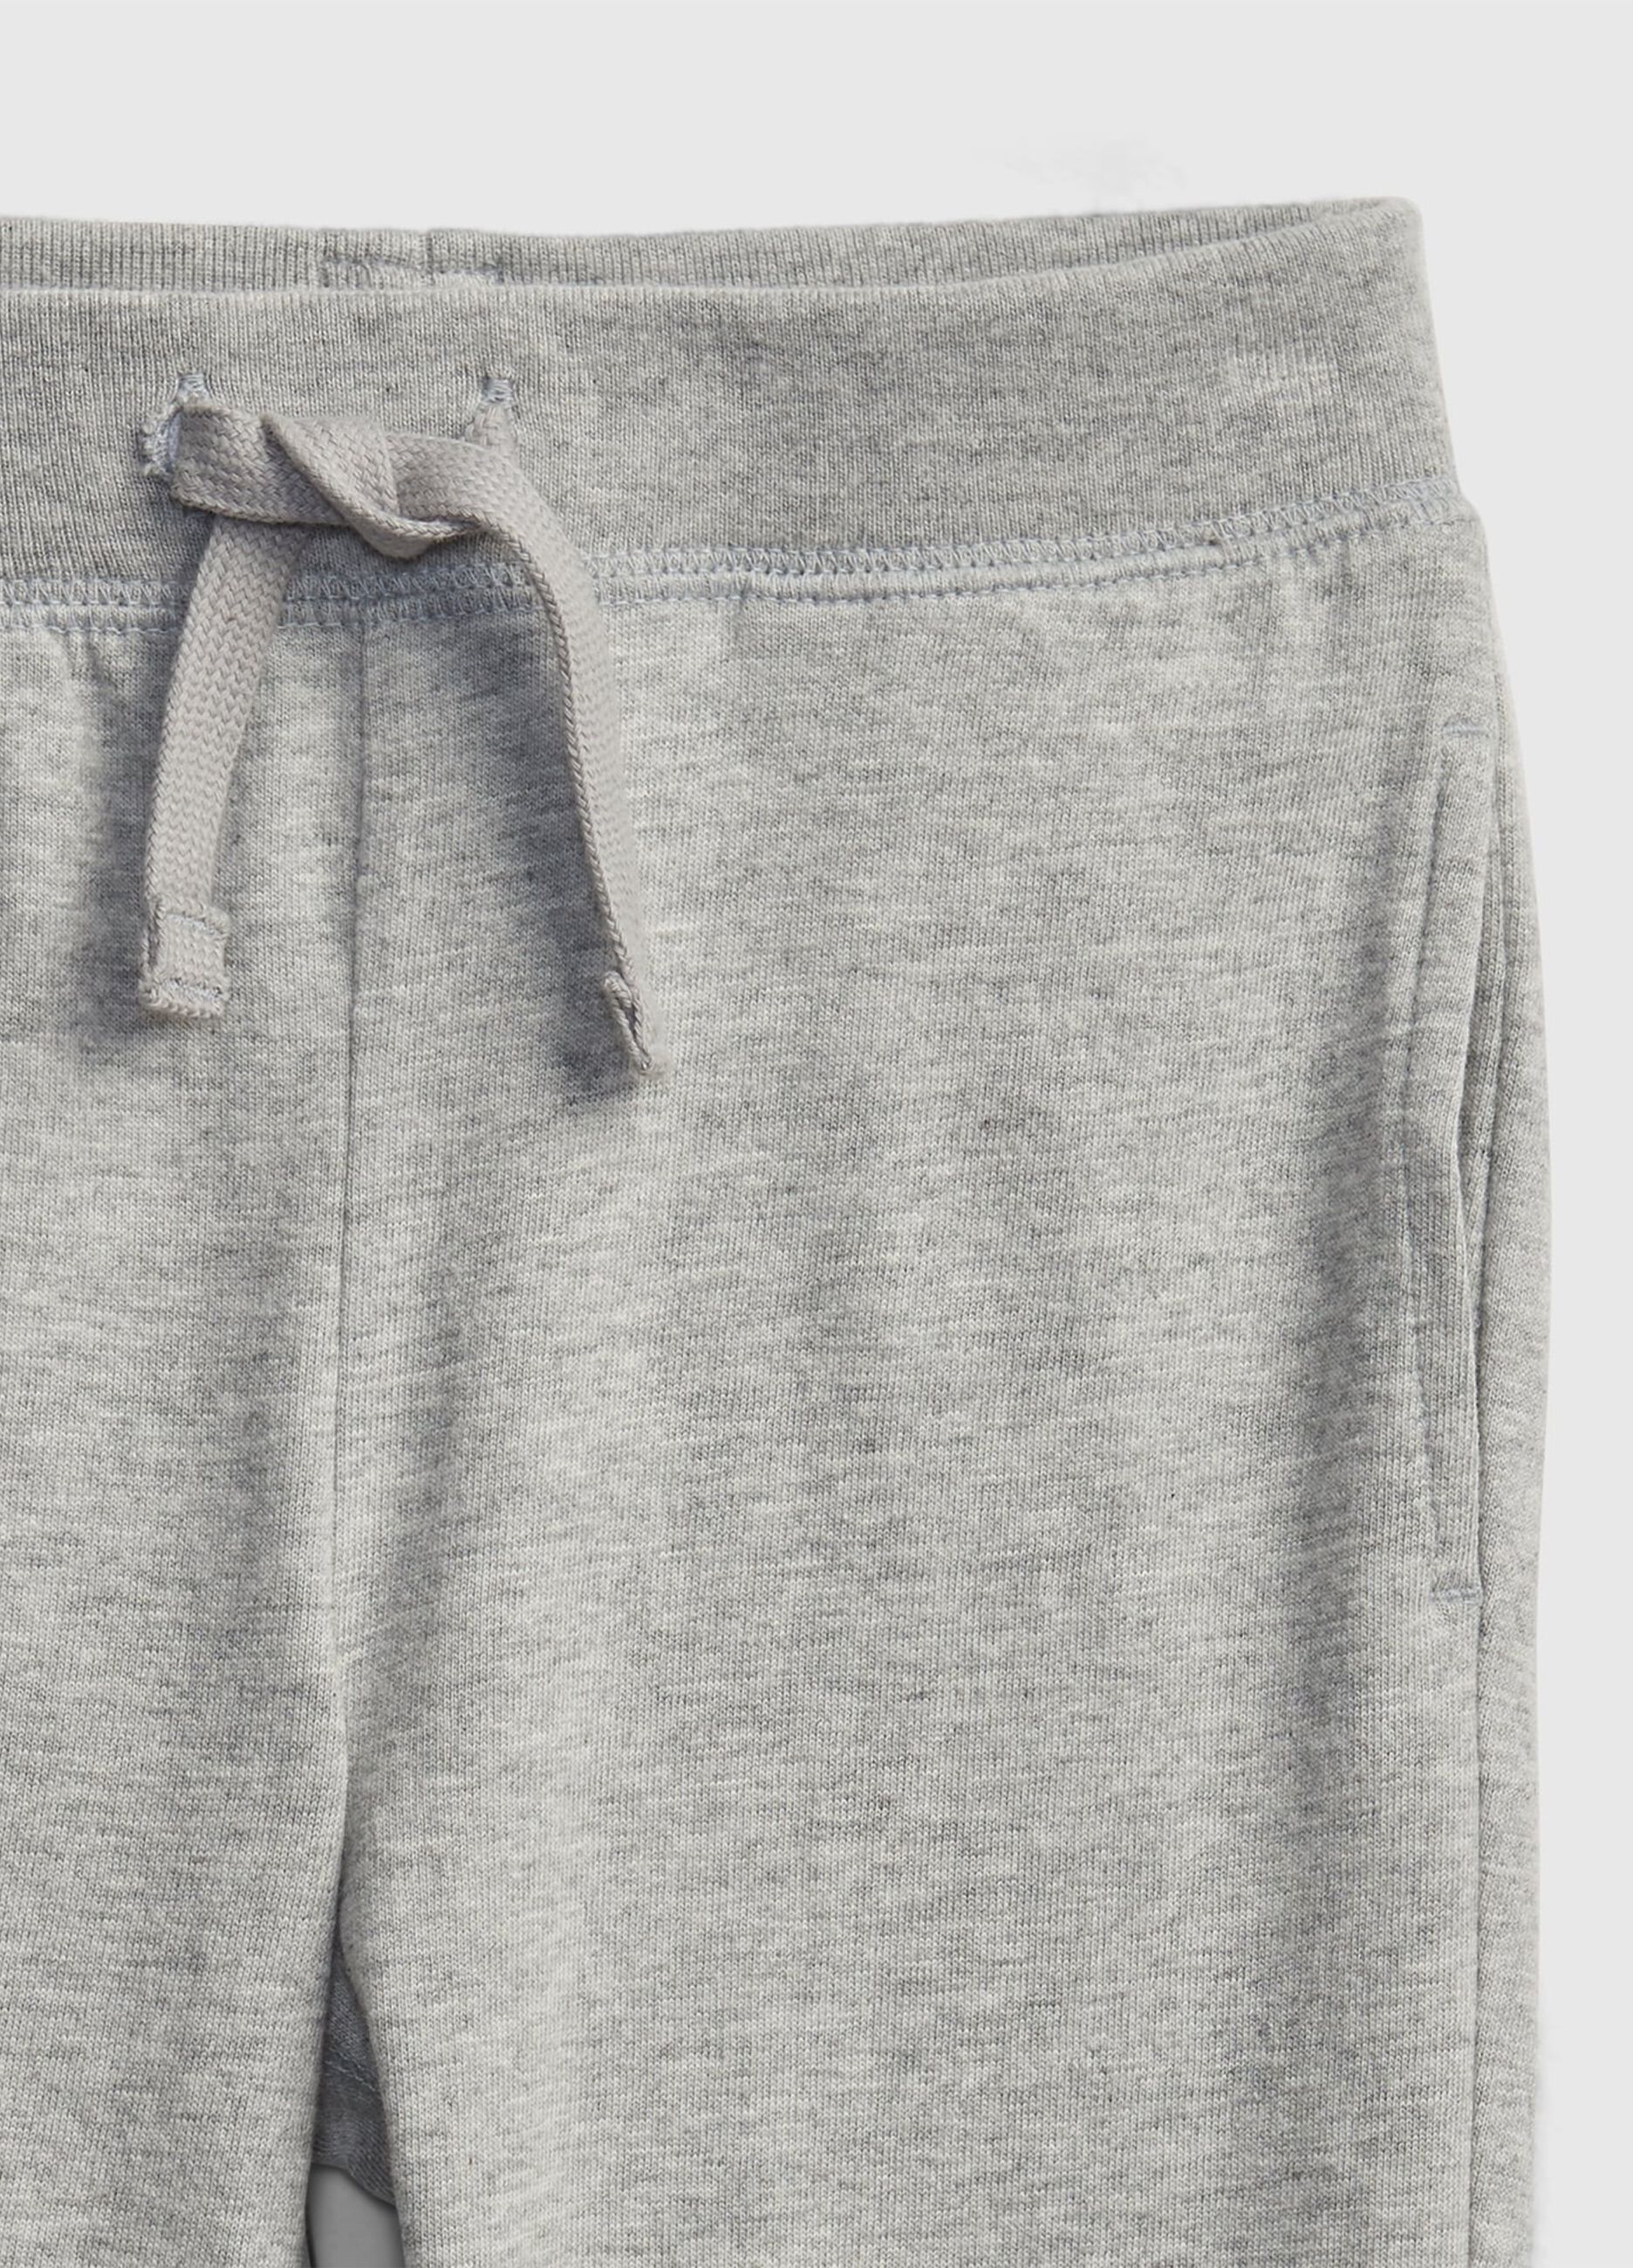 Fleece joggers with drawstring and logo patch